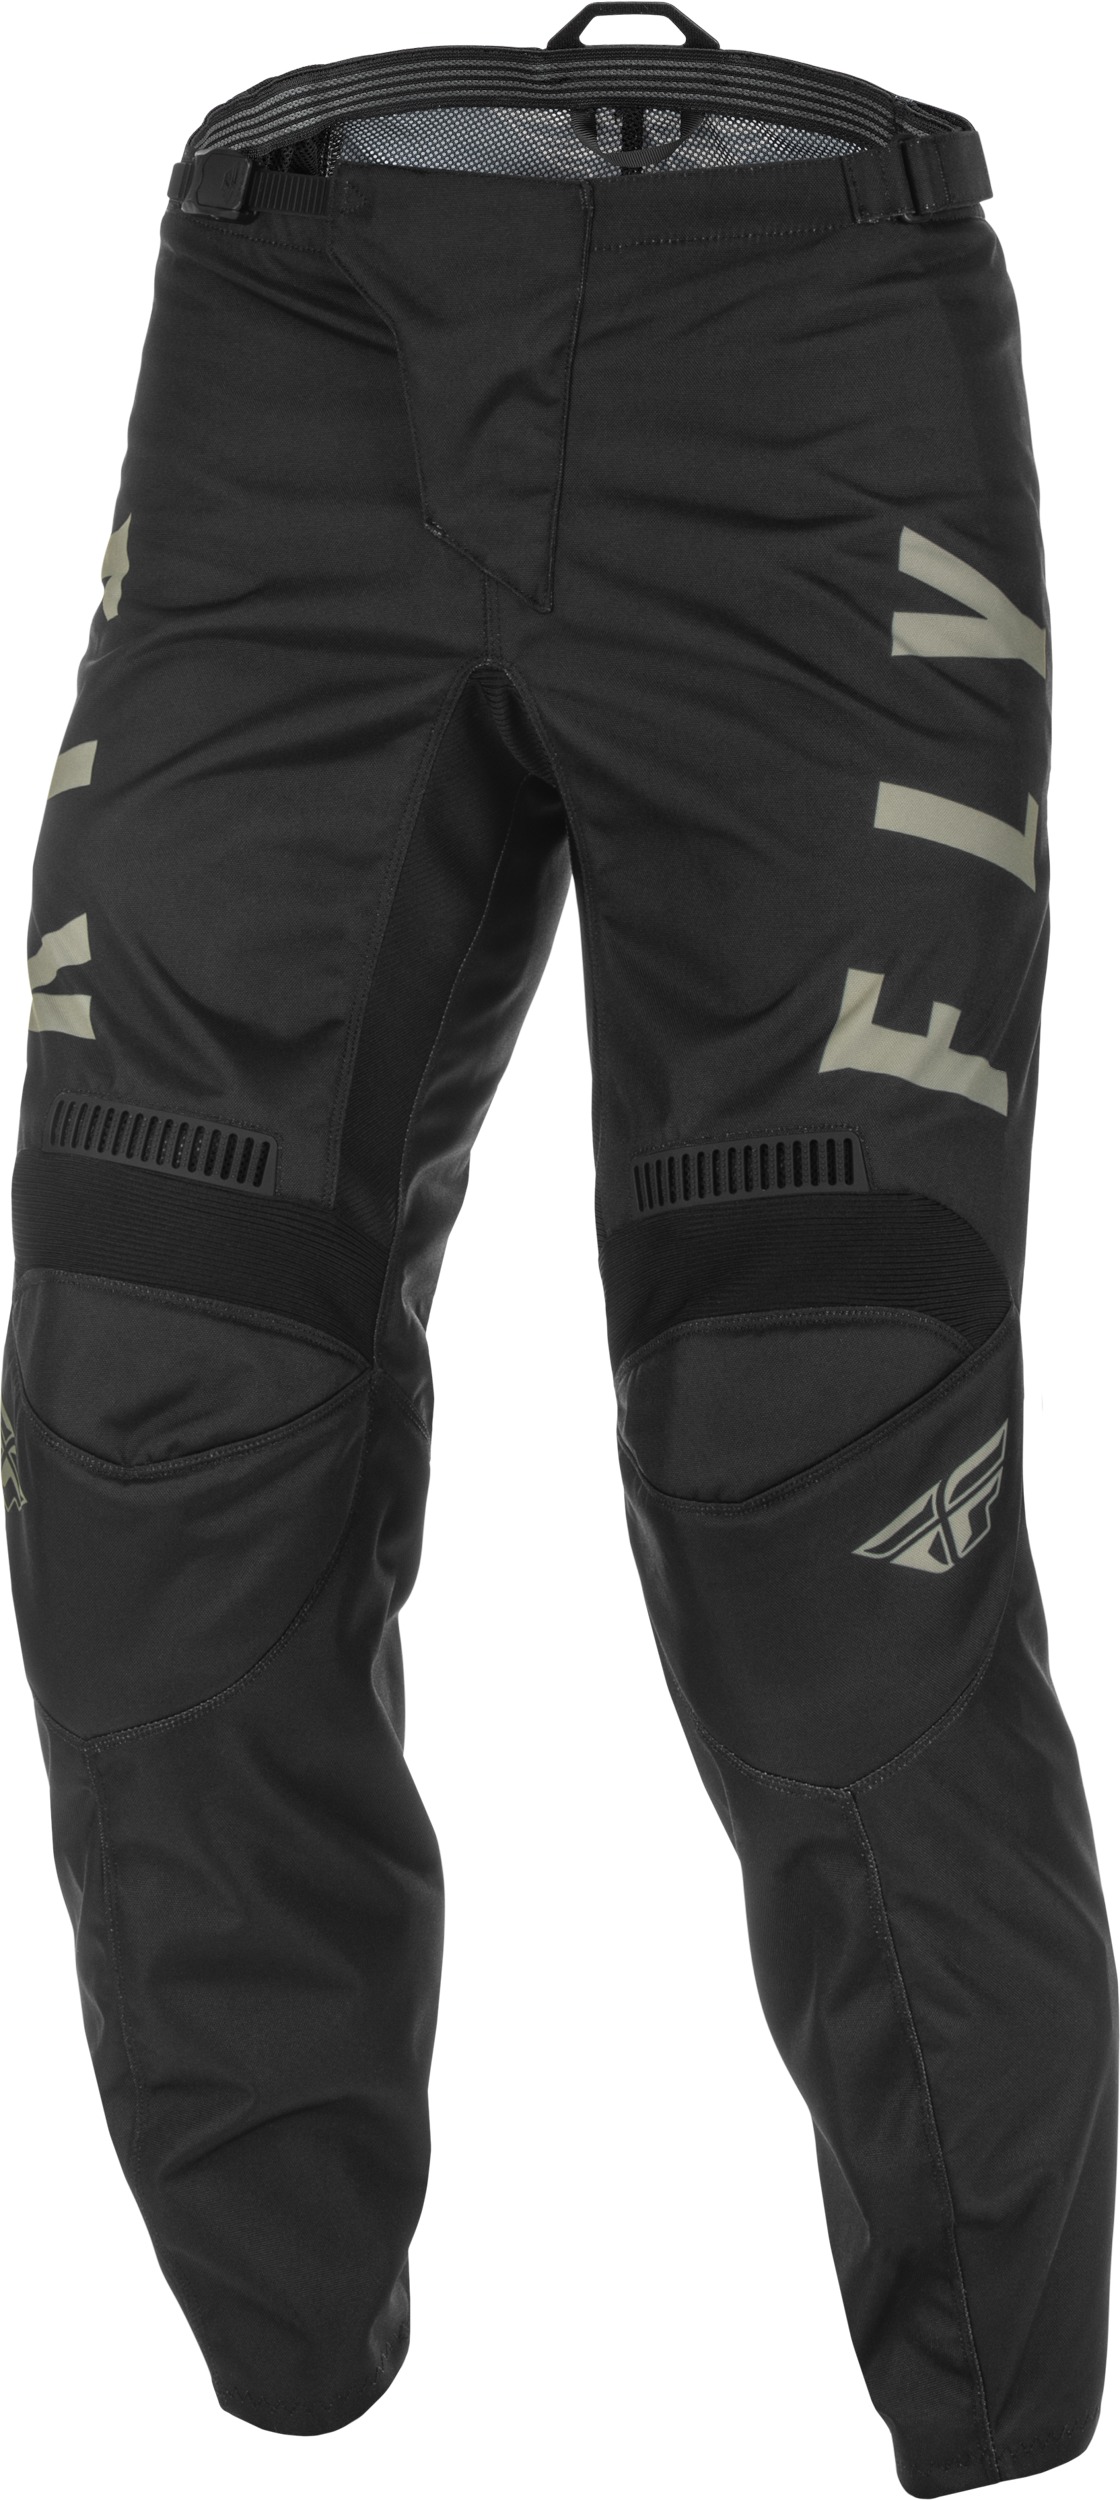 Black & Gray Fly F-16 Riding Pants - Size 36 - Click Image to Close